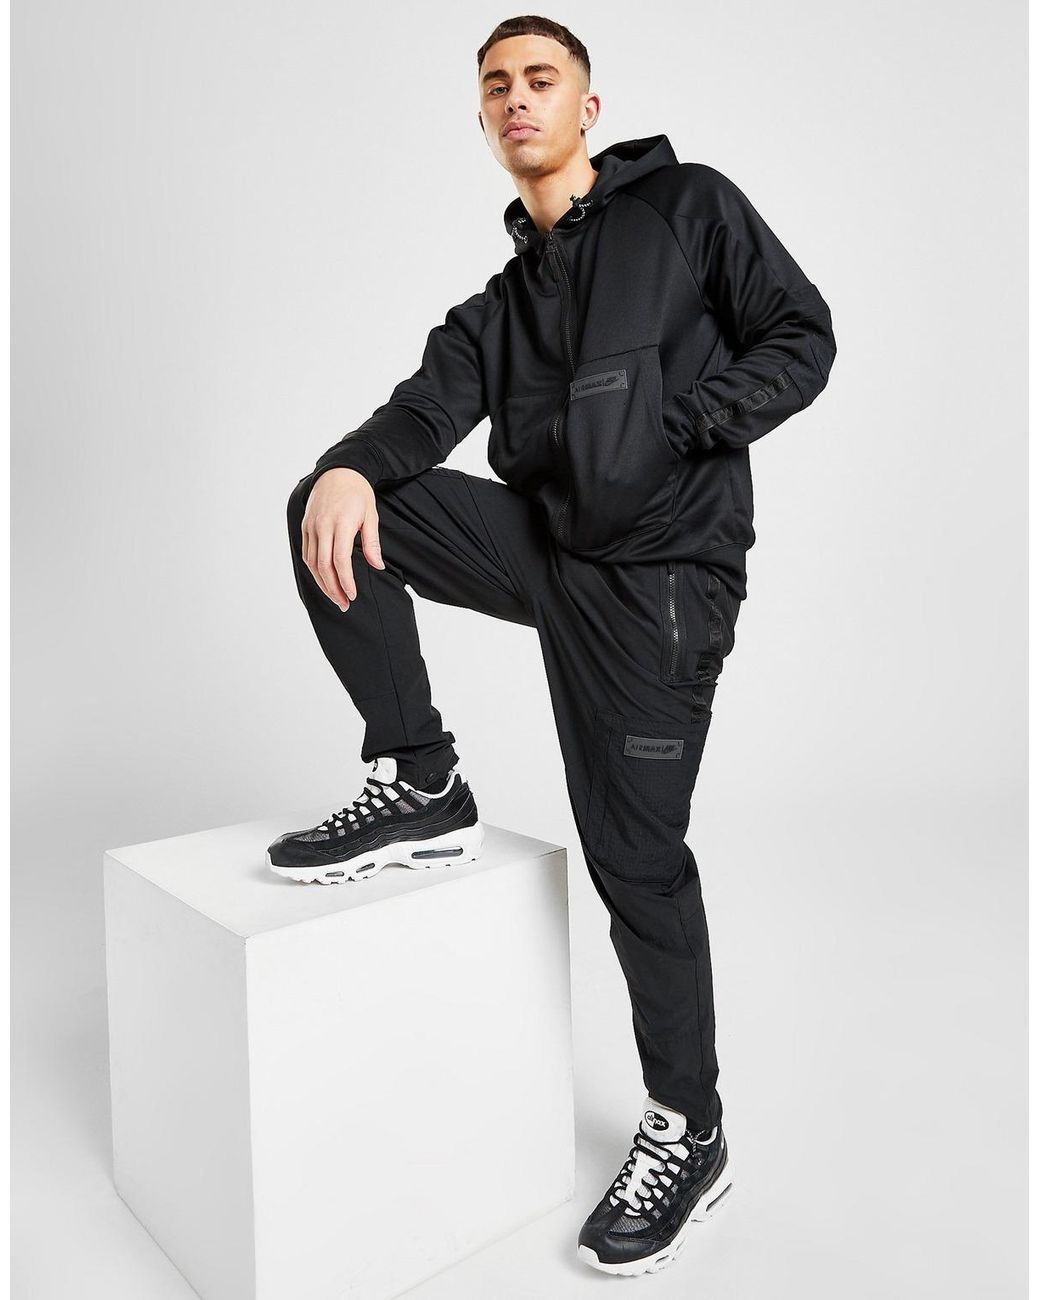 Nike Synthetic Air Max Woven Cargo Pants in Black for Men - Lyst